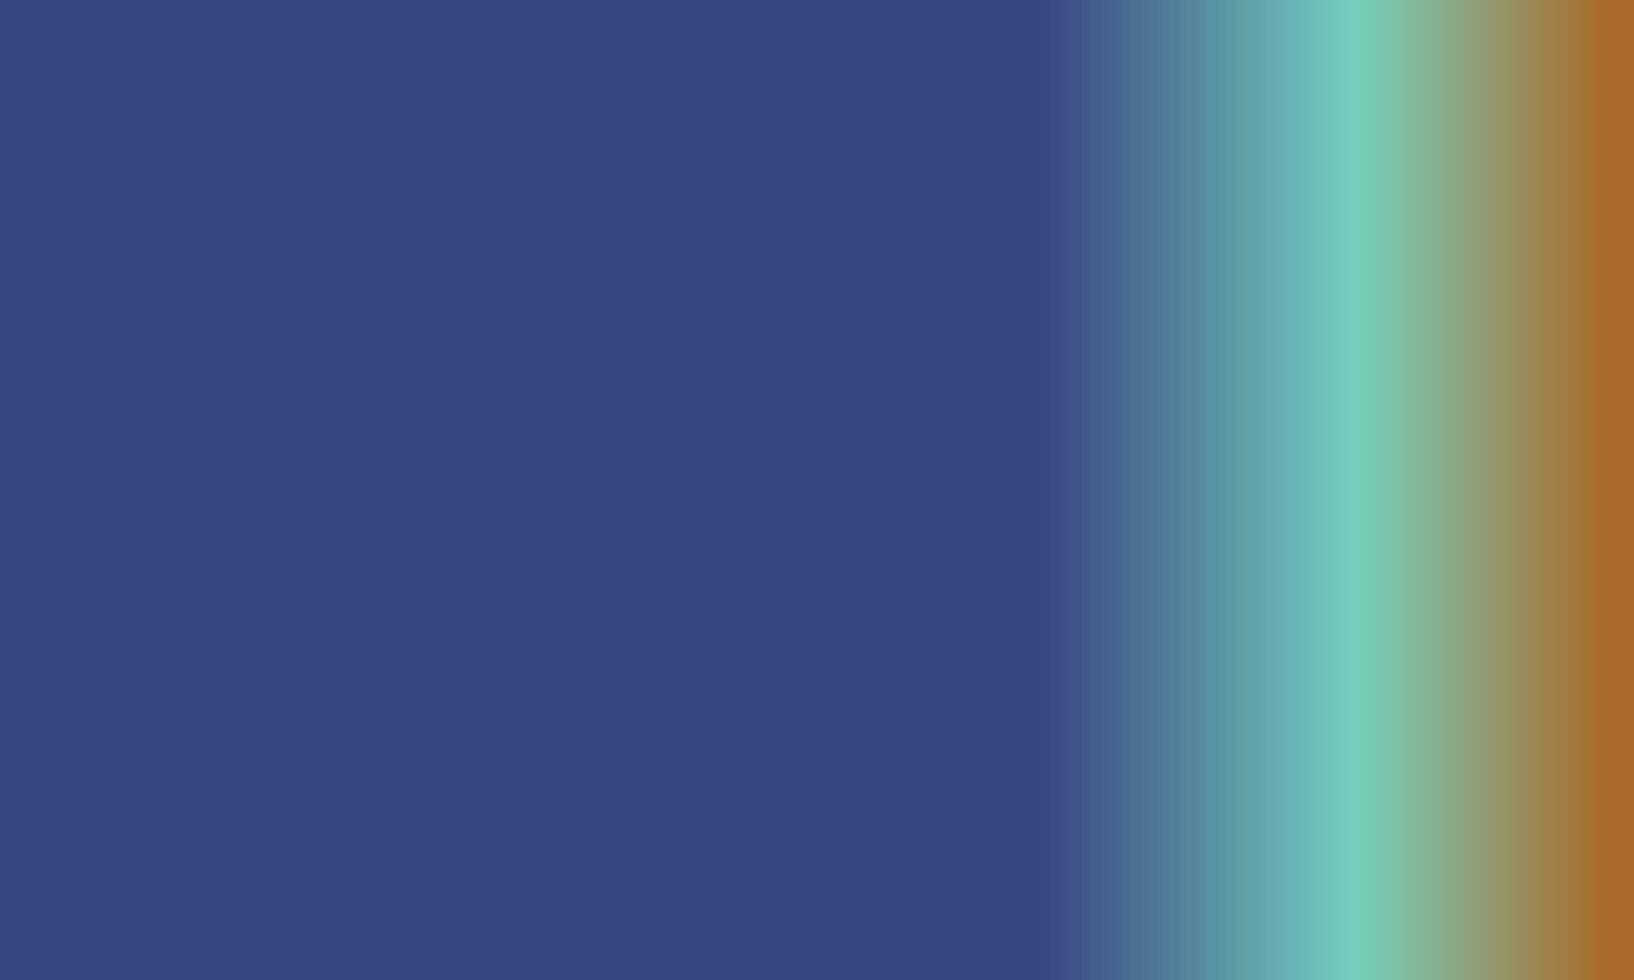 Design simple navy blue,cyan and brown gradient color illustration background photo